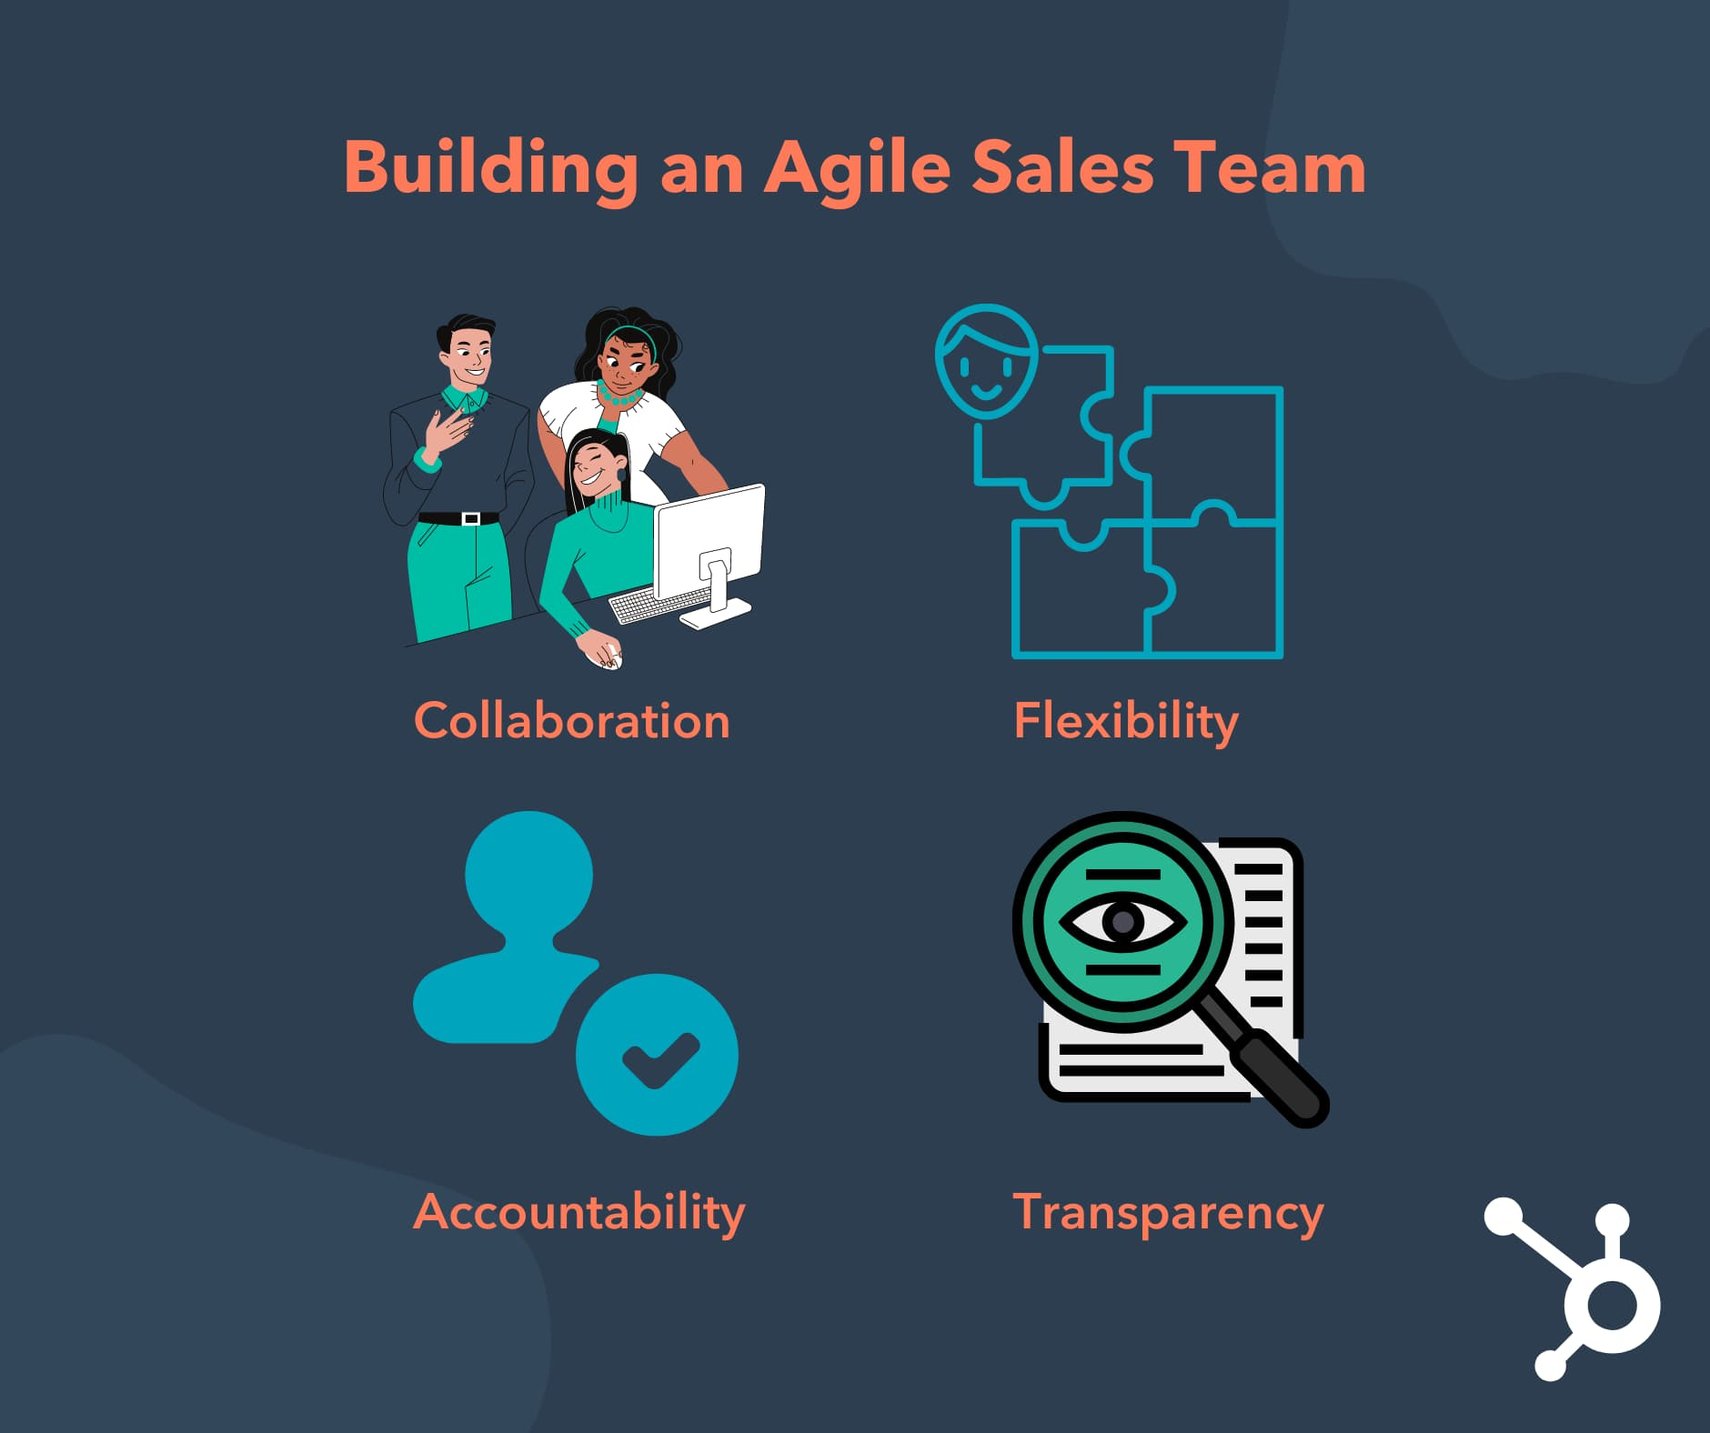 The Ultimate Guide to Agile Sales